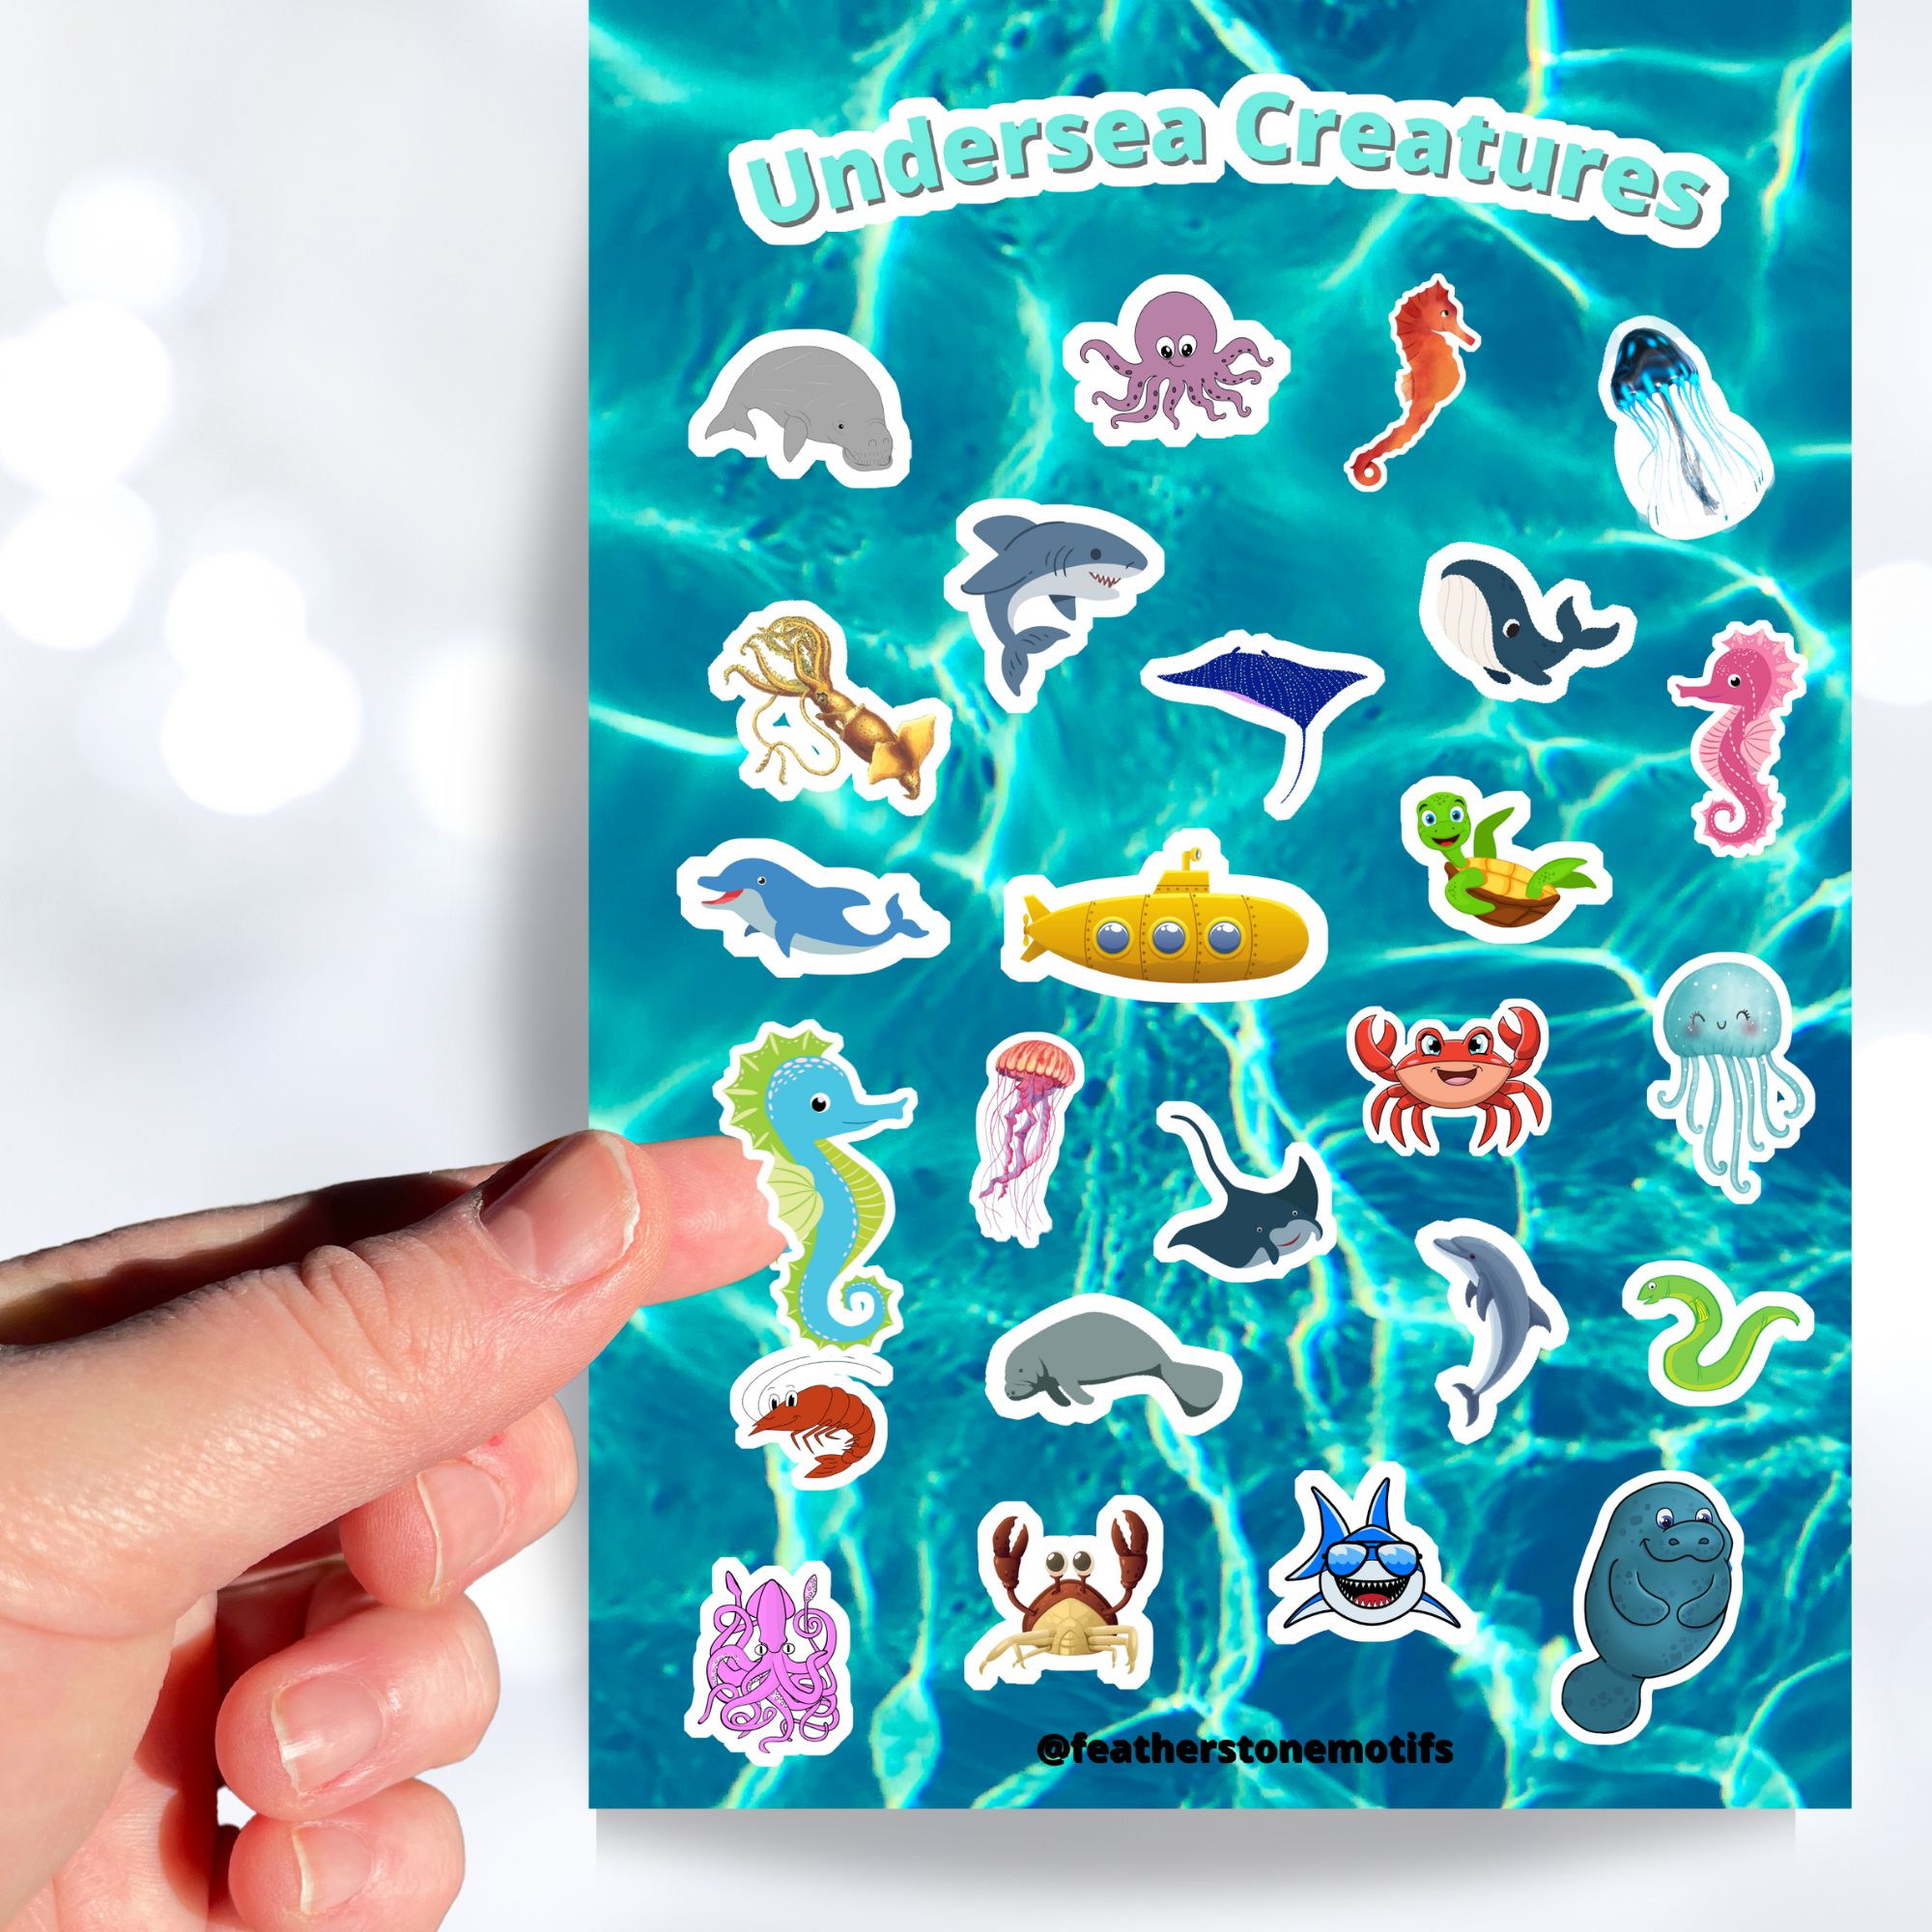 This sticker sheet is filled with fun and cute sticker images of all your favorite undersea creatures! Images include whales, sharks, jellyfish, manatee's, and crabs. There's even a yellow submarine! This image shows a hand holding a sticker of a blue and green seahorse above the sticker sheet.